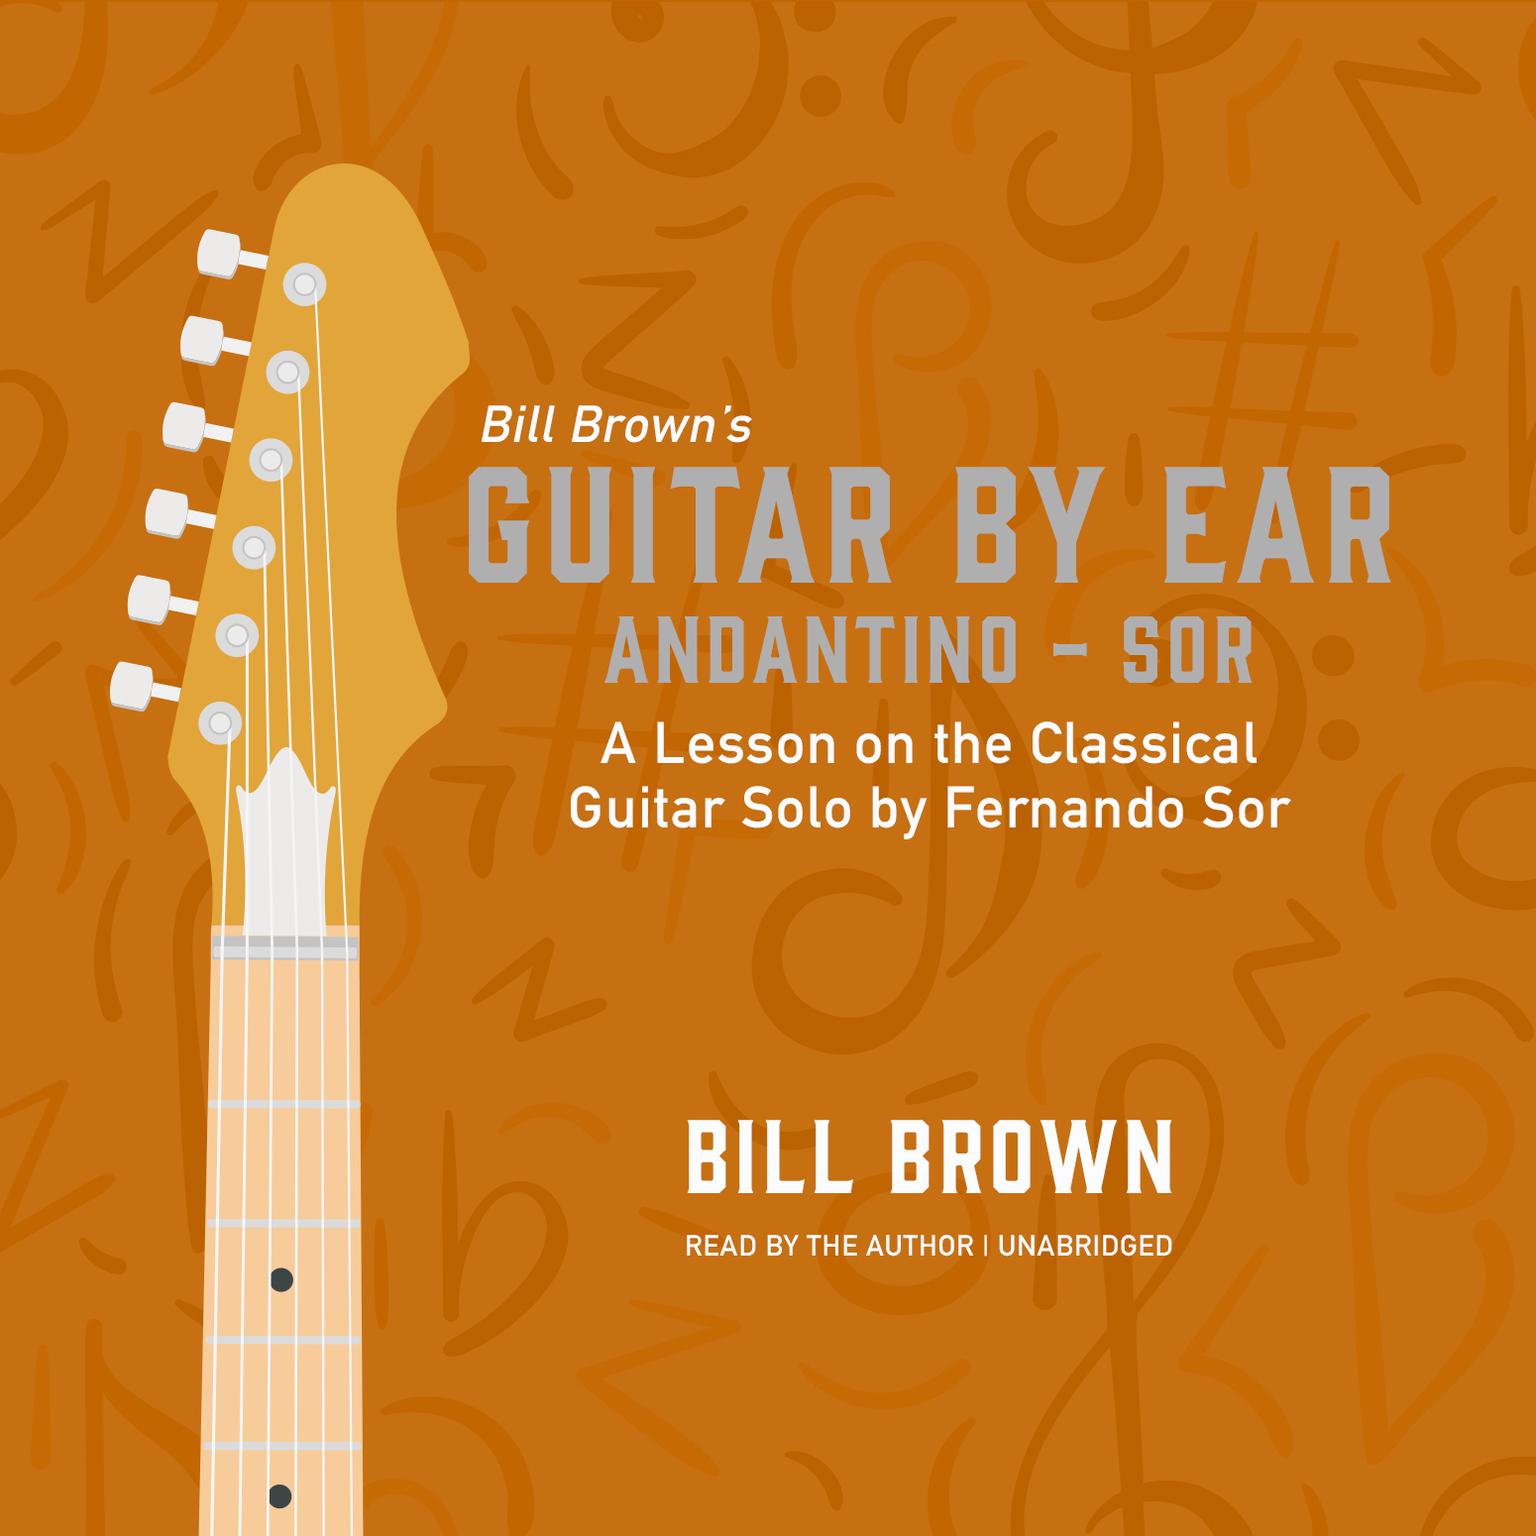 Andantino—Sor: A Lesson on the Classical Guitar Solo by Fernando Sor Audiobook, by Bill Brown